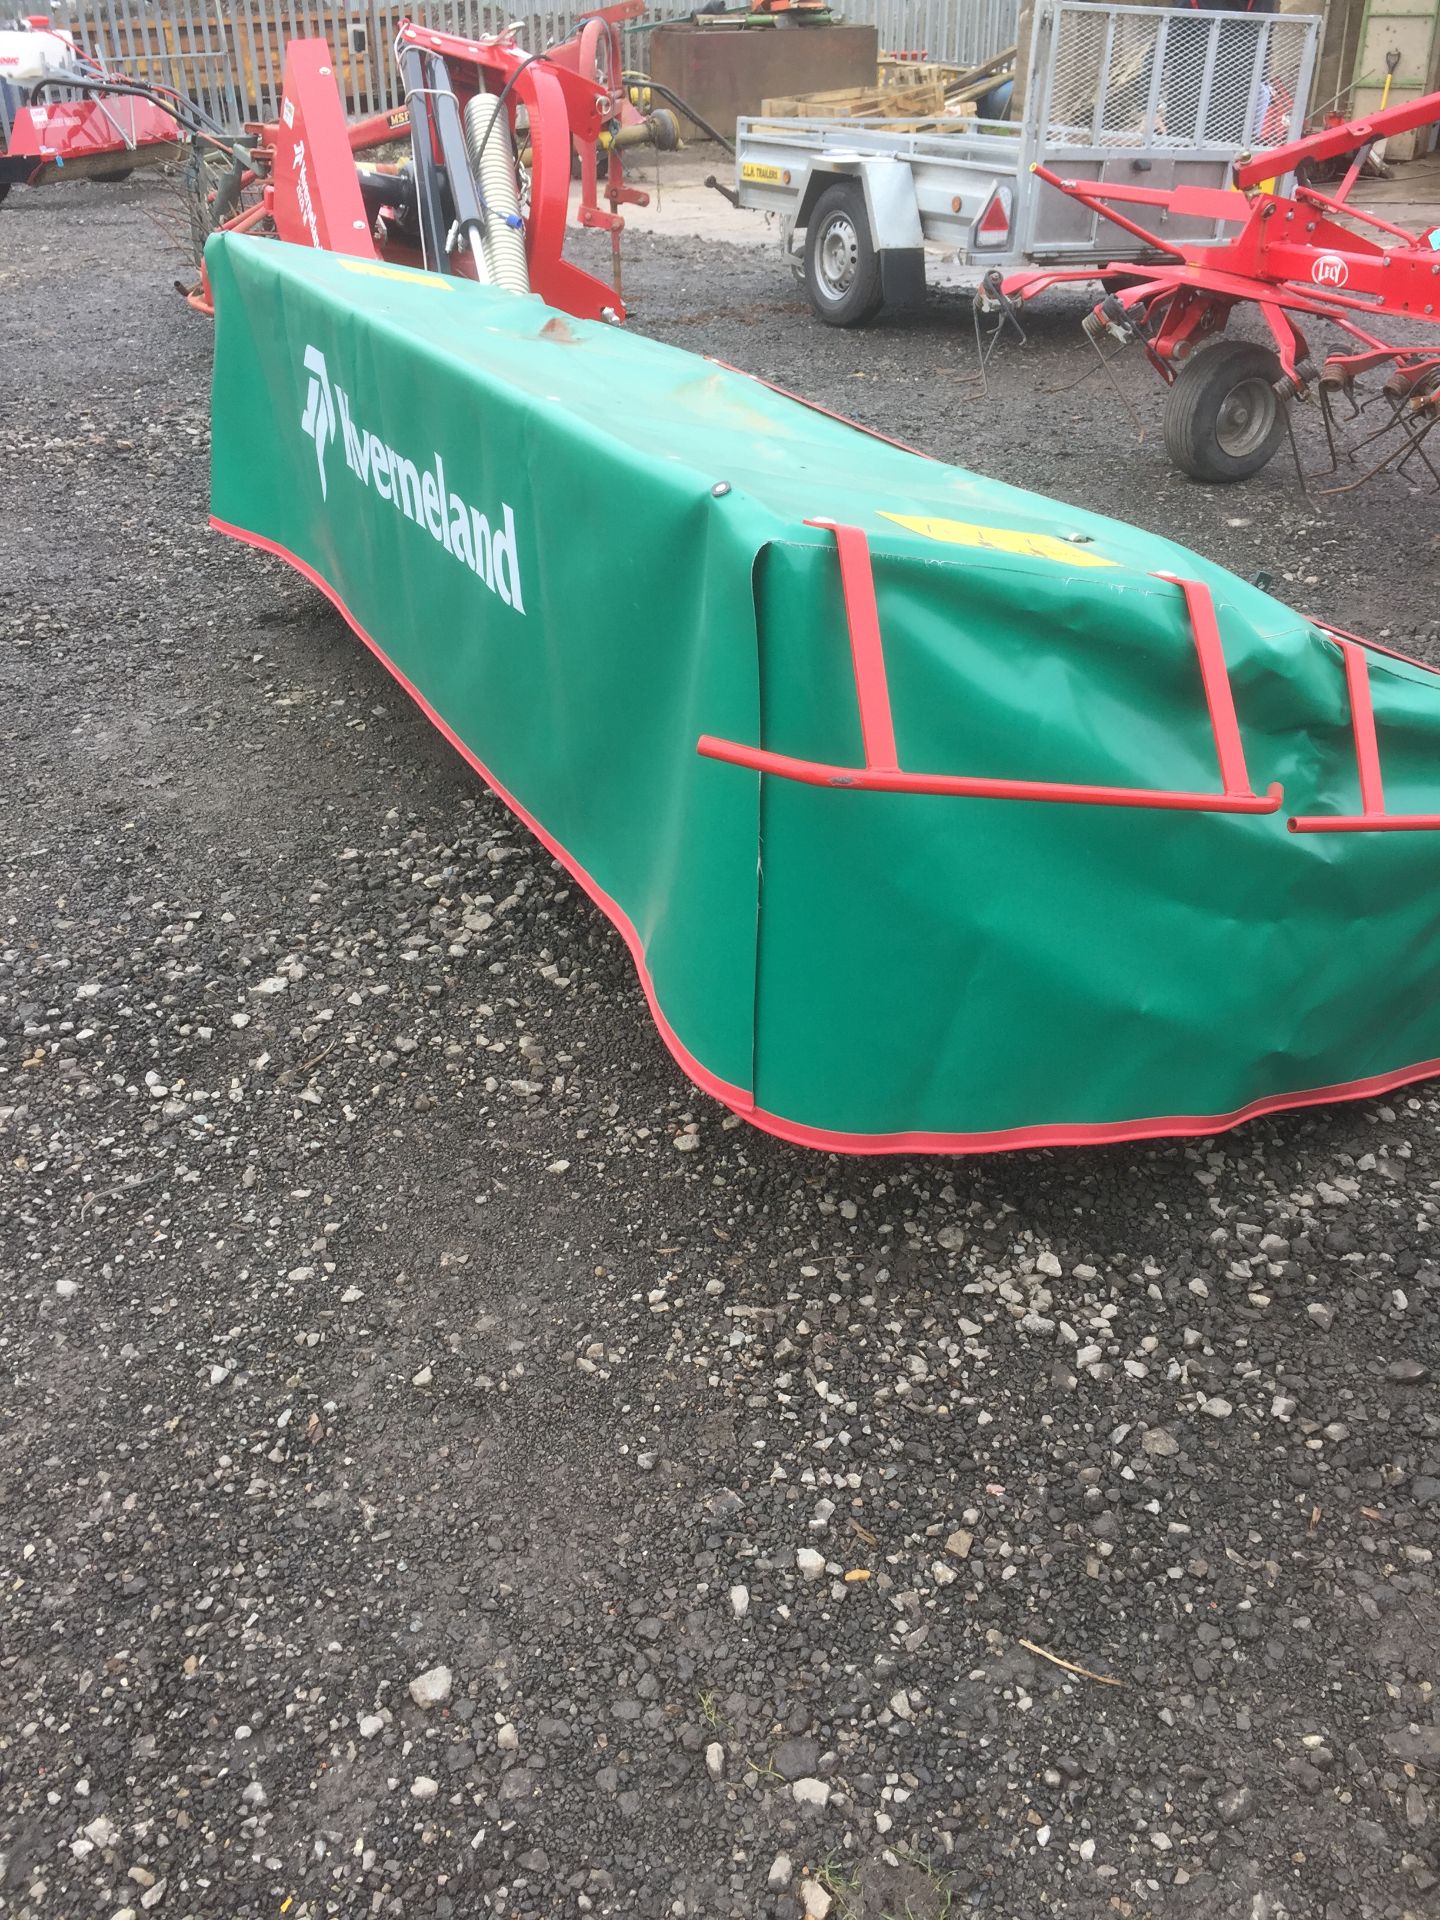 Kverneland 2628M disc mower with 3 pt linkage (unused), Serial No. KT474978 (2018) - Image 2 of 3